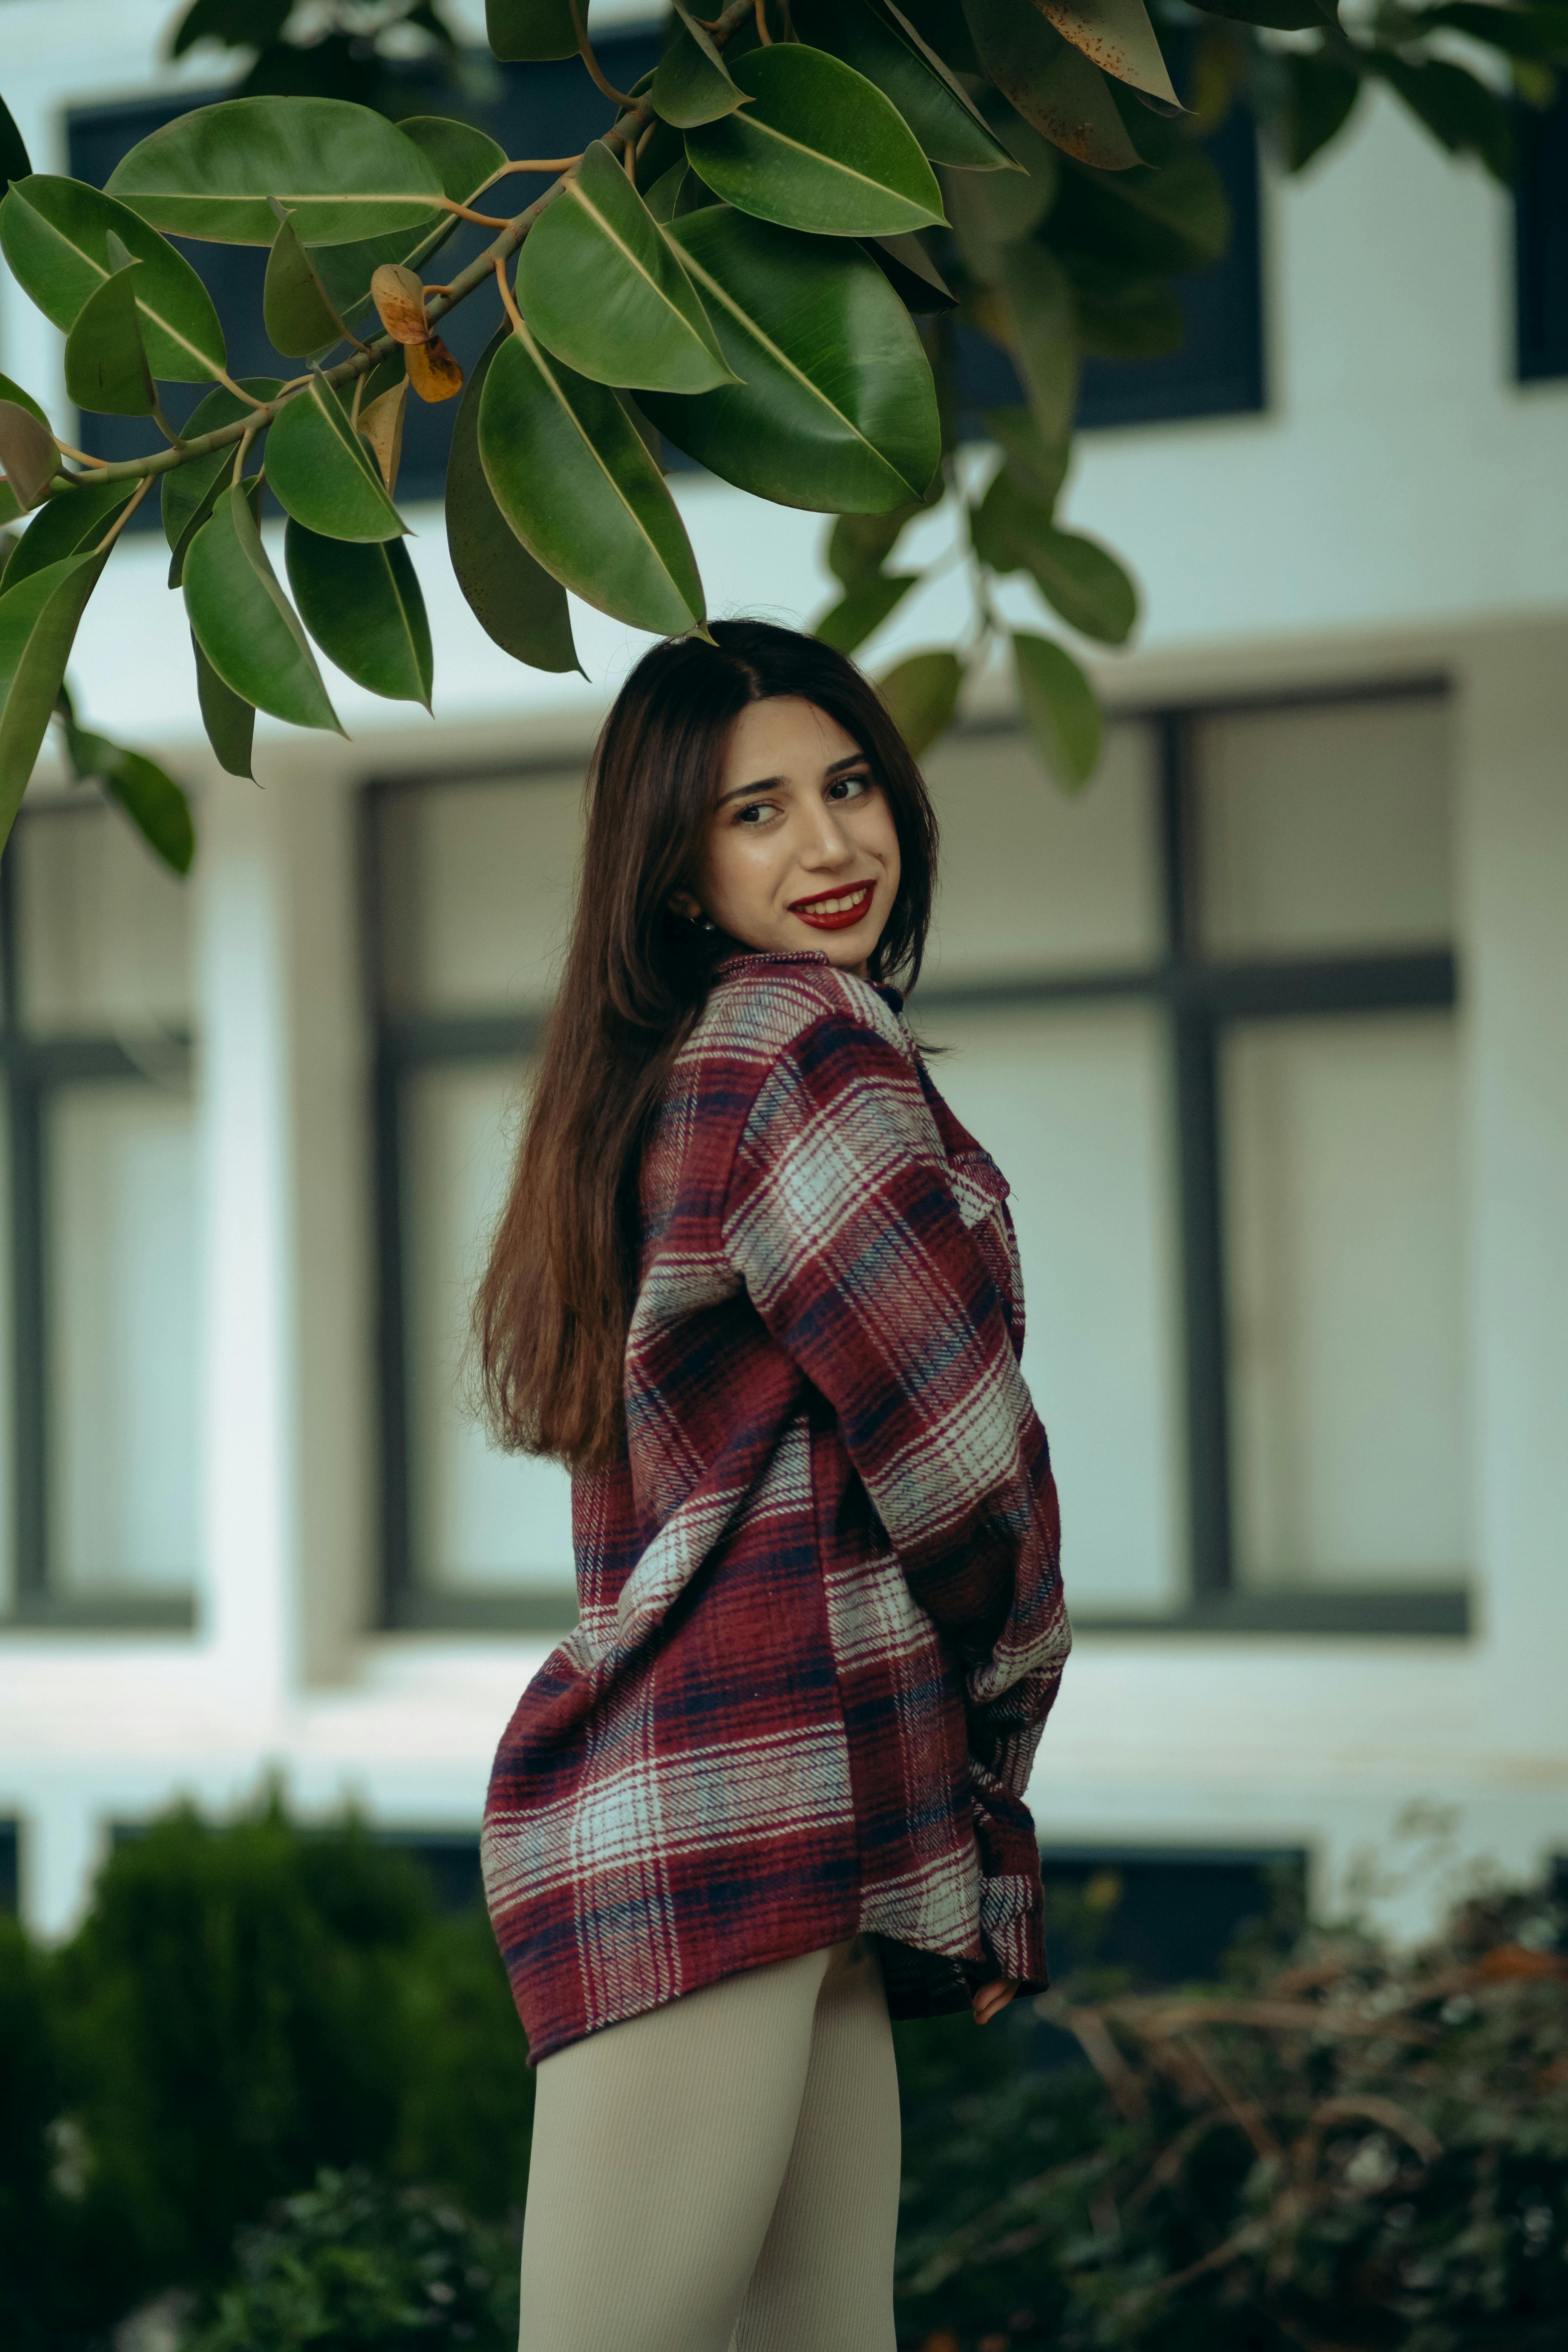 https://images.pexels.com/photos/19741371/pexels-photo-19741371/free-photo-of-young-woman-in-flannel-blouse-and-leggings-under-a-tree-branch.jpeg